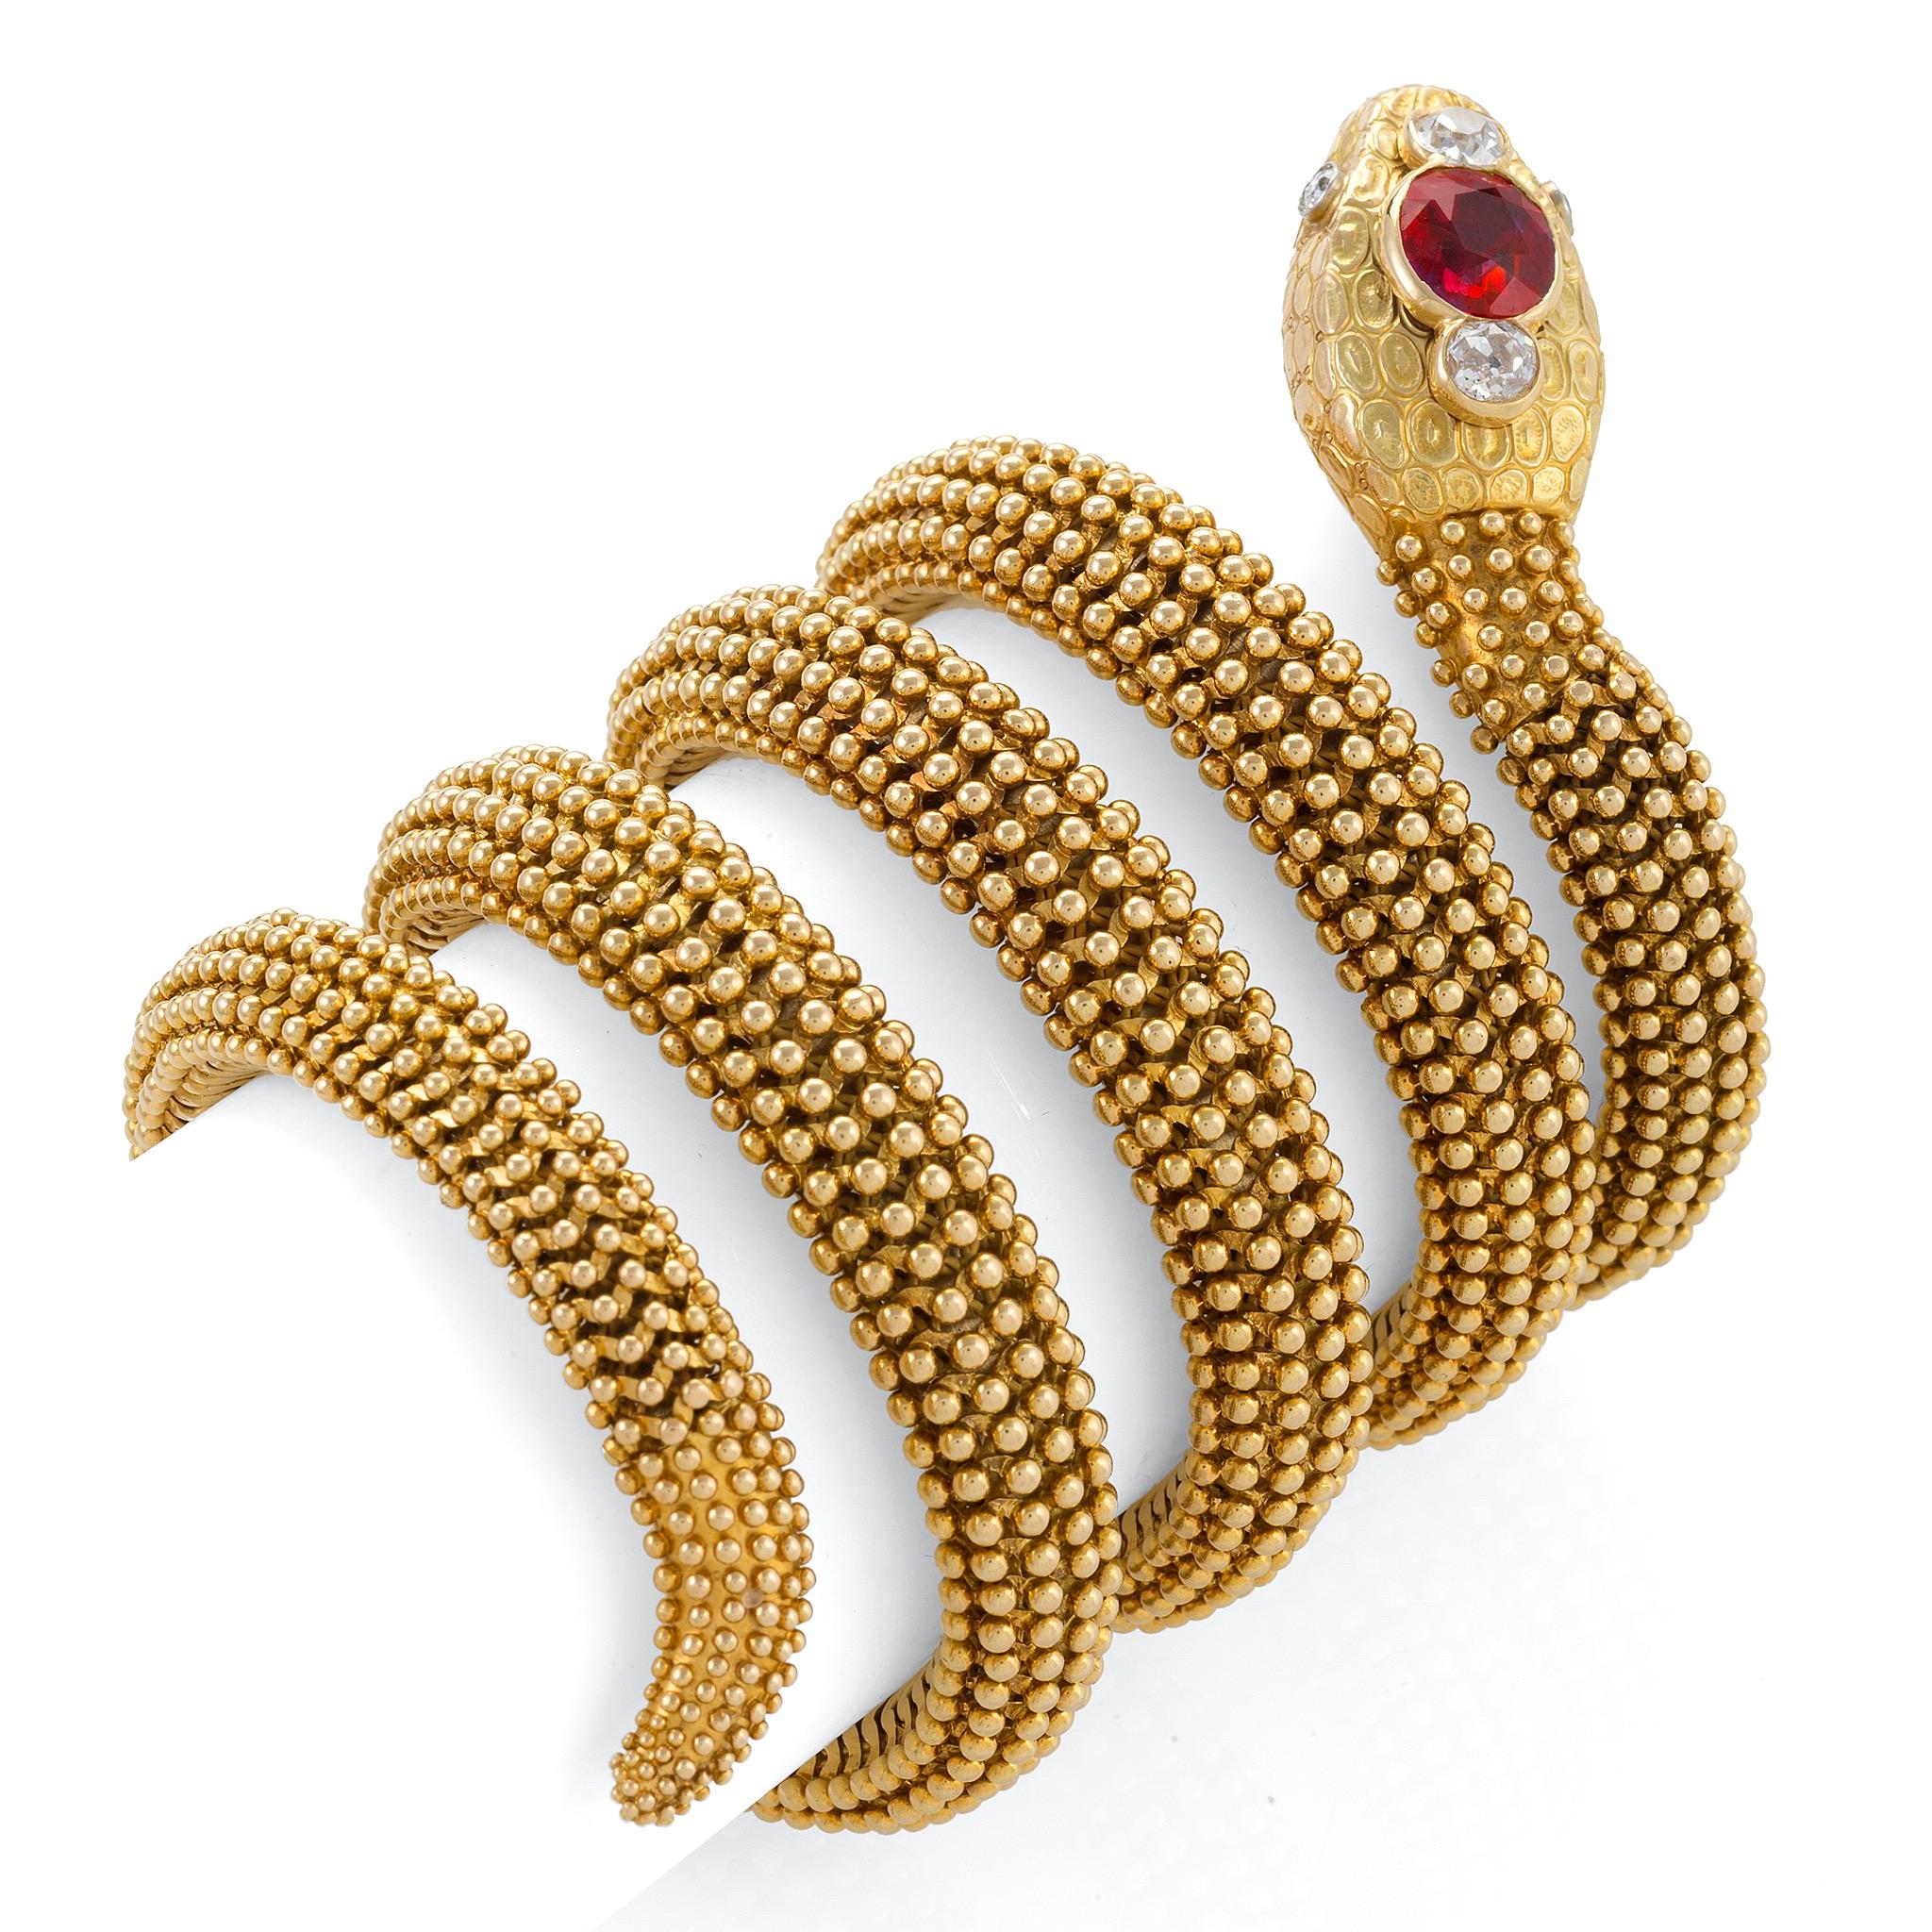 This opulent five-coil gold, Ceylon ruby and diamond 